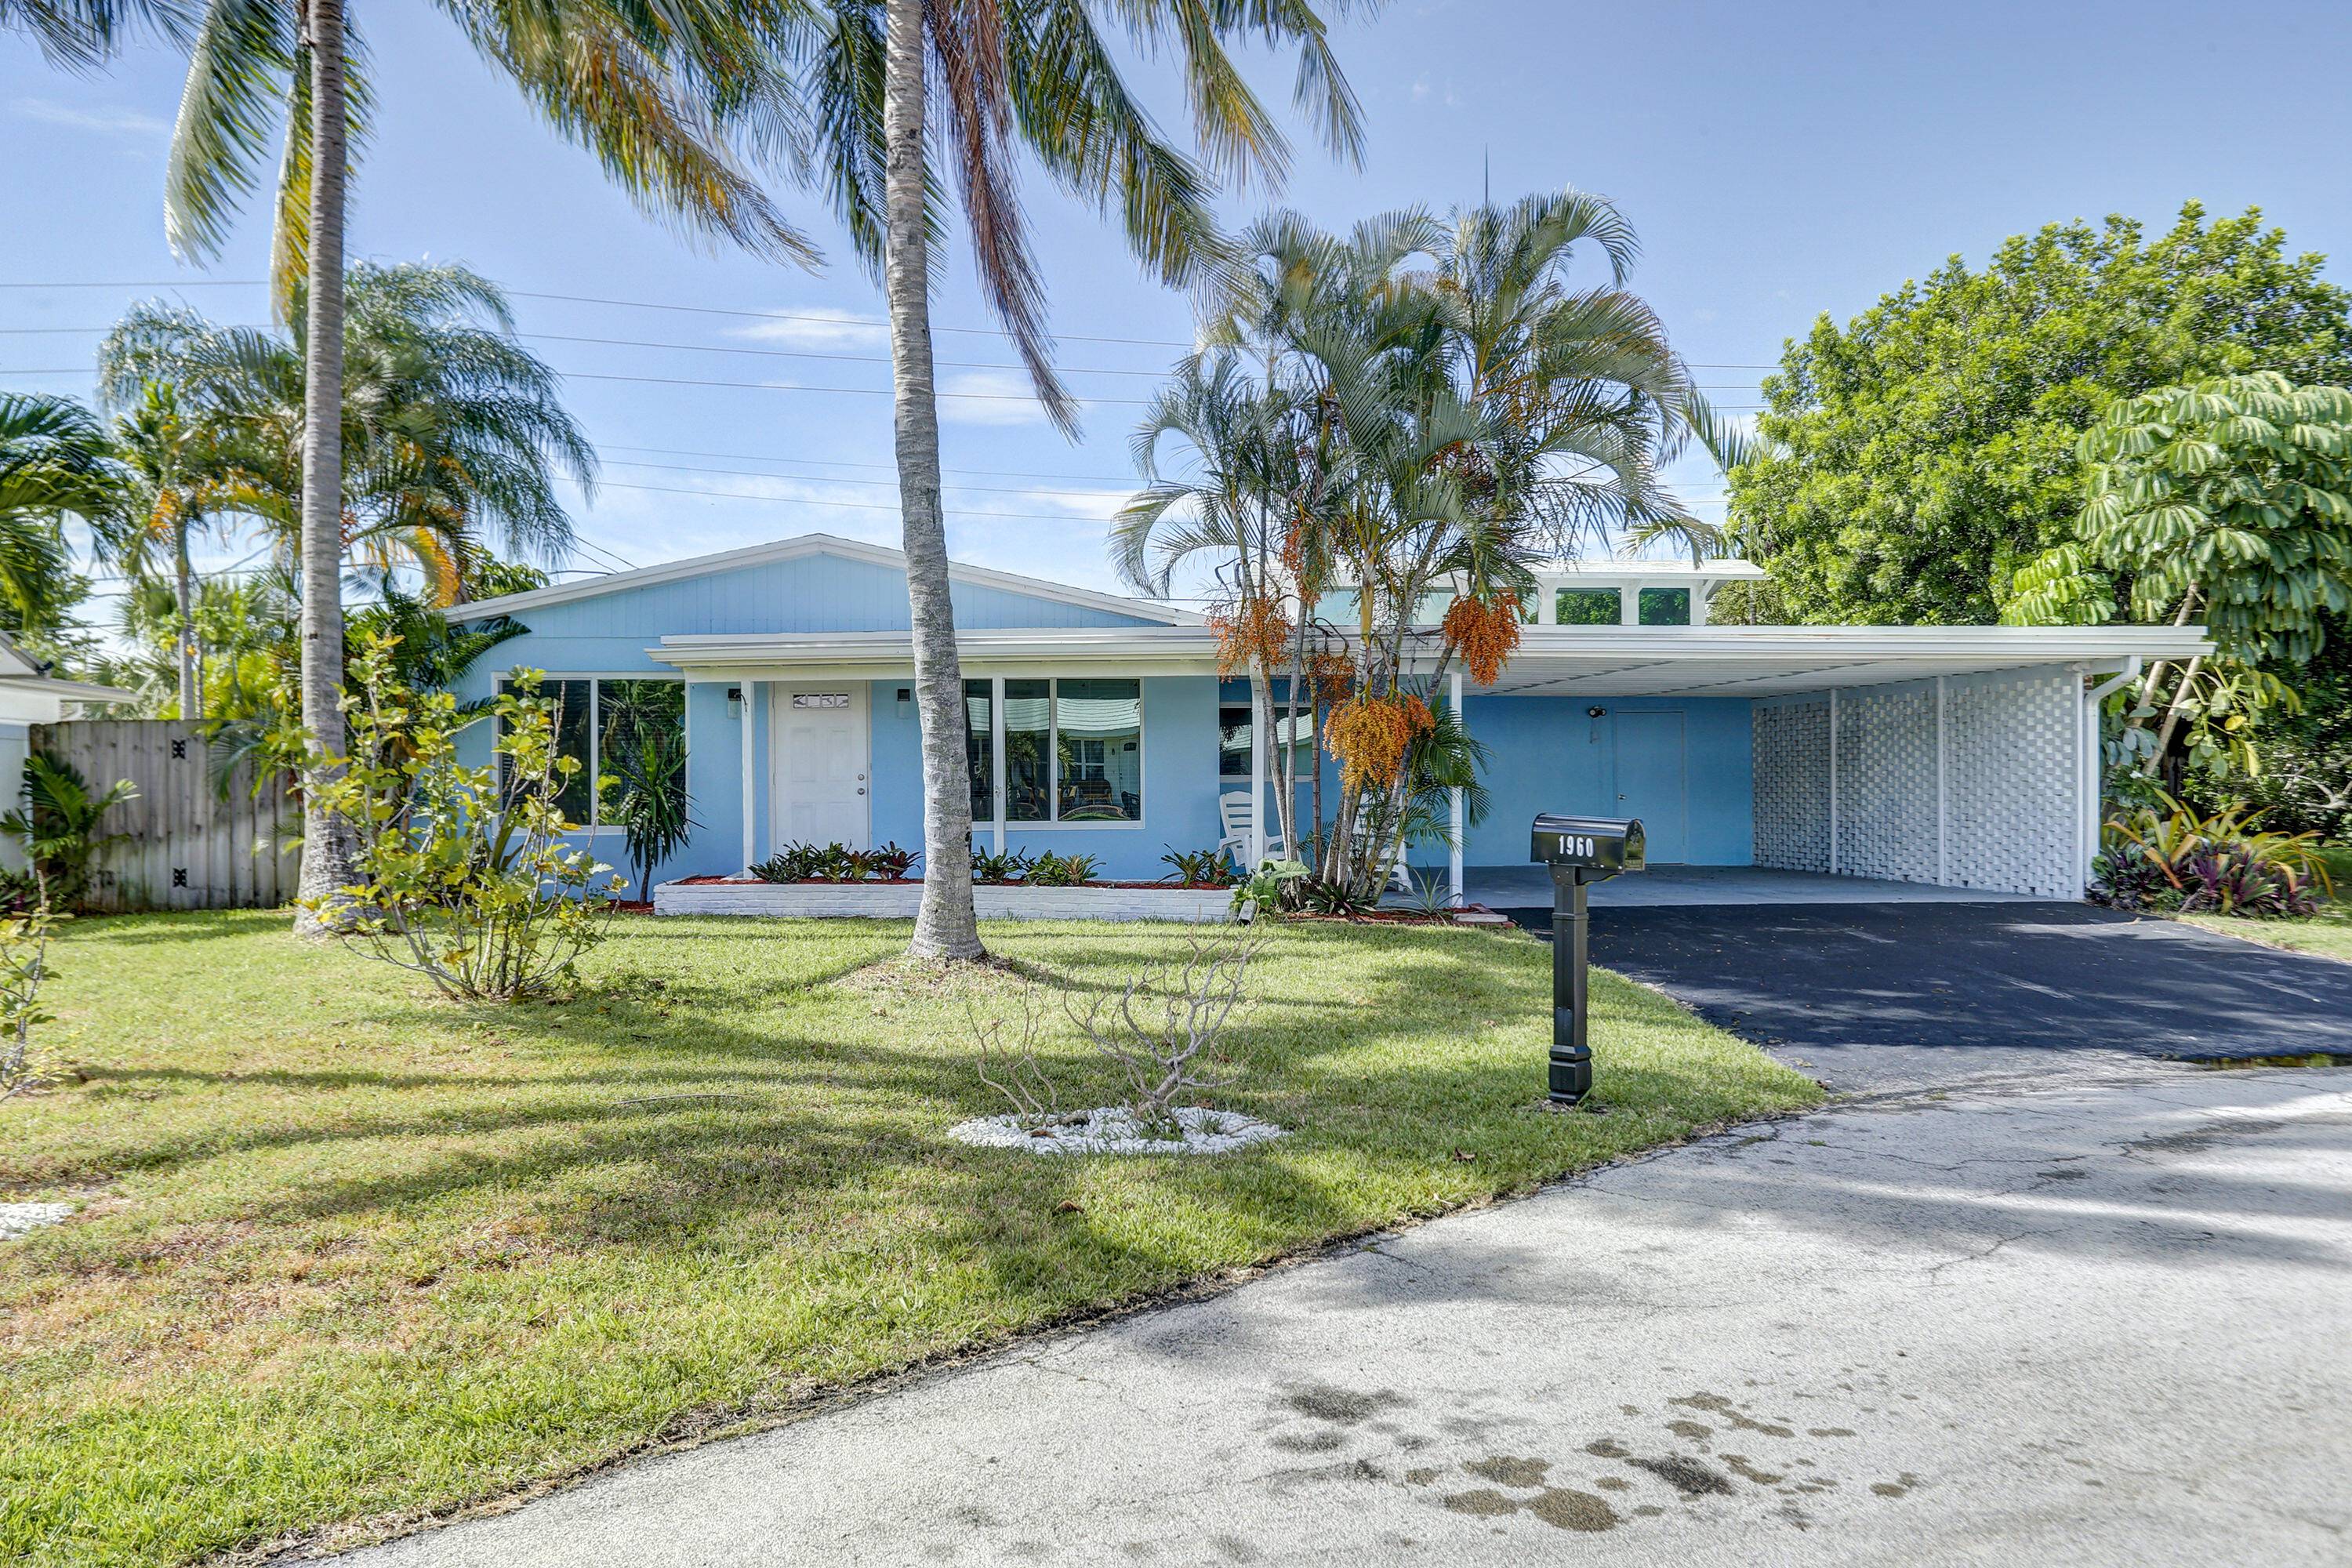 Newly renovated and Move in ready 3 2 single family home on end of private cul de sac close to beaches and boating ramps.